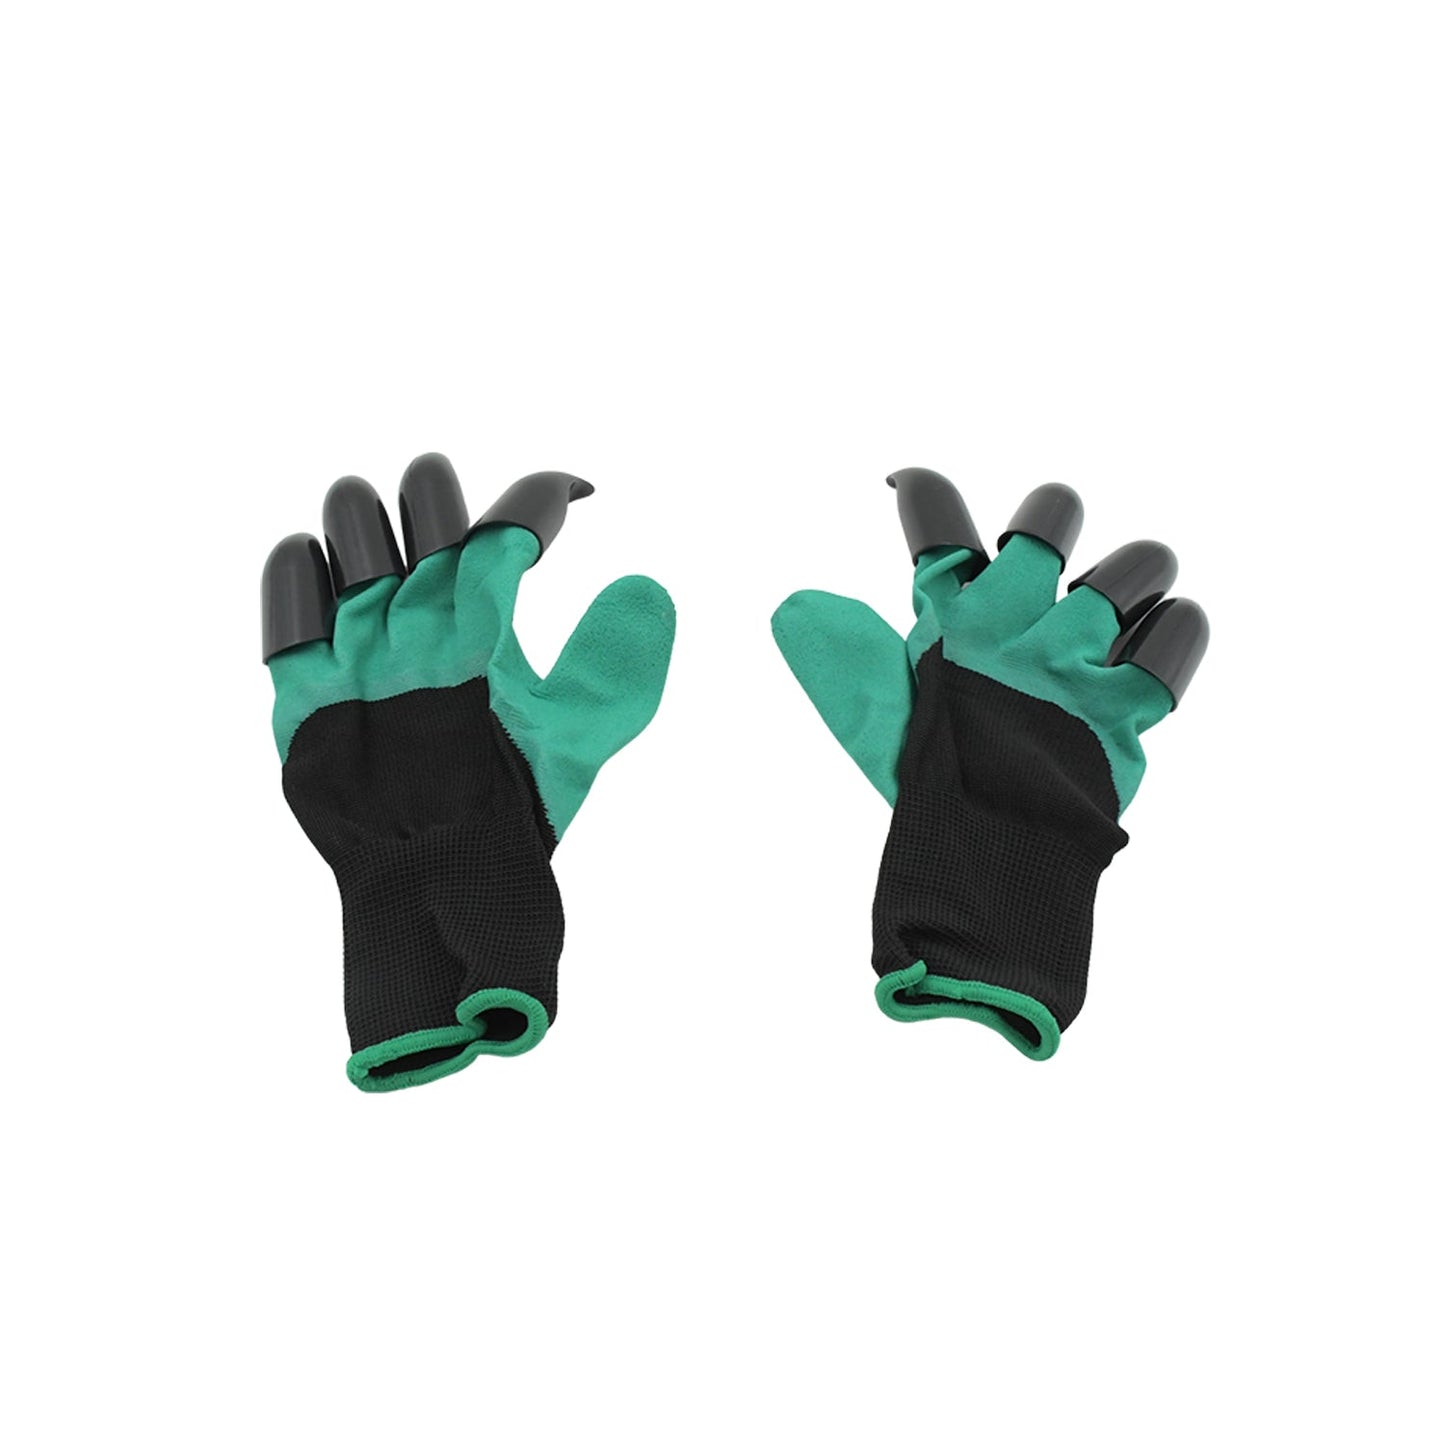 0719 Heavy Duty Garden Farming Gloves- ABC Plastic Washable With Hand Fingertips & ABS Claws For Digging & Planting, Gardening Tool for Home Pots Agriculture Industrial Farming work Men & Women (1 Pair)